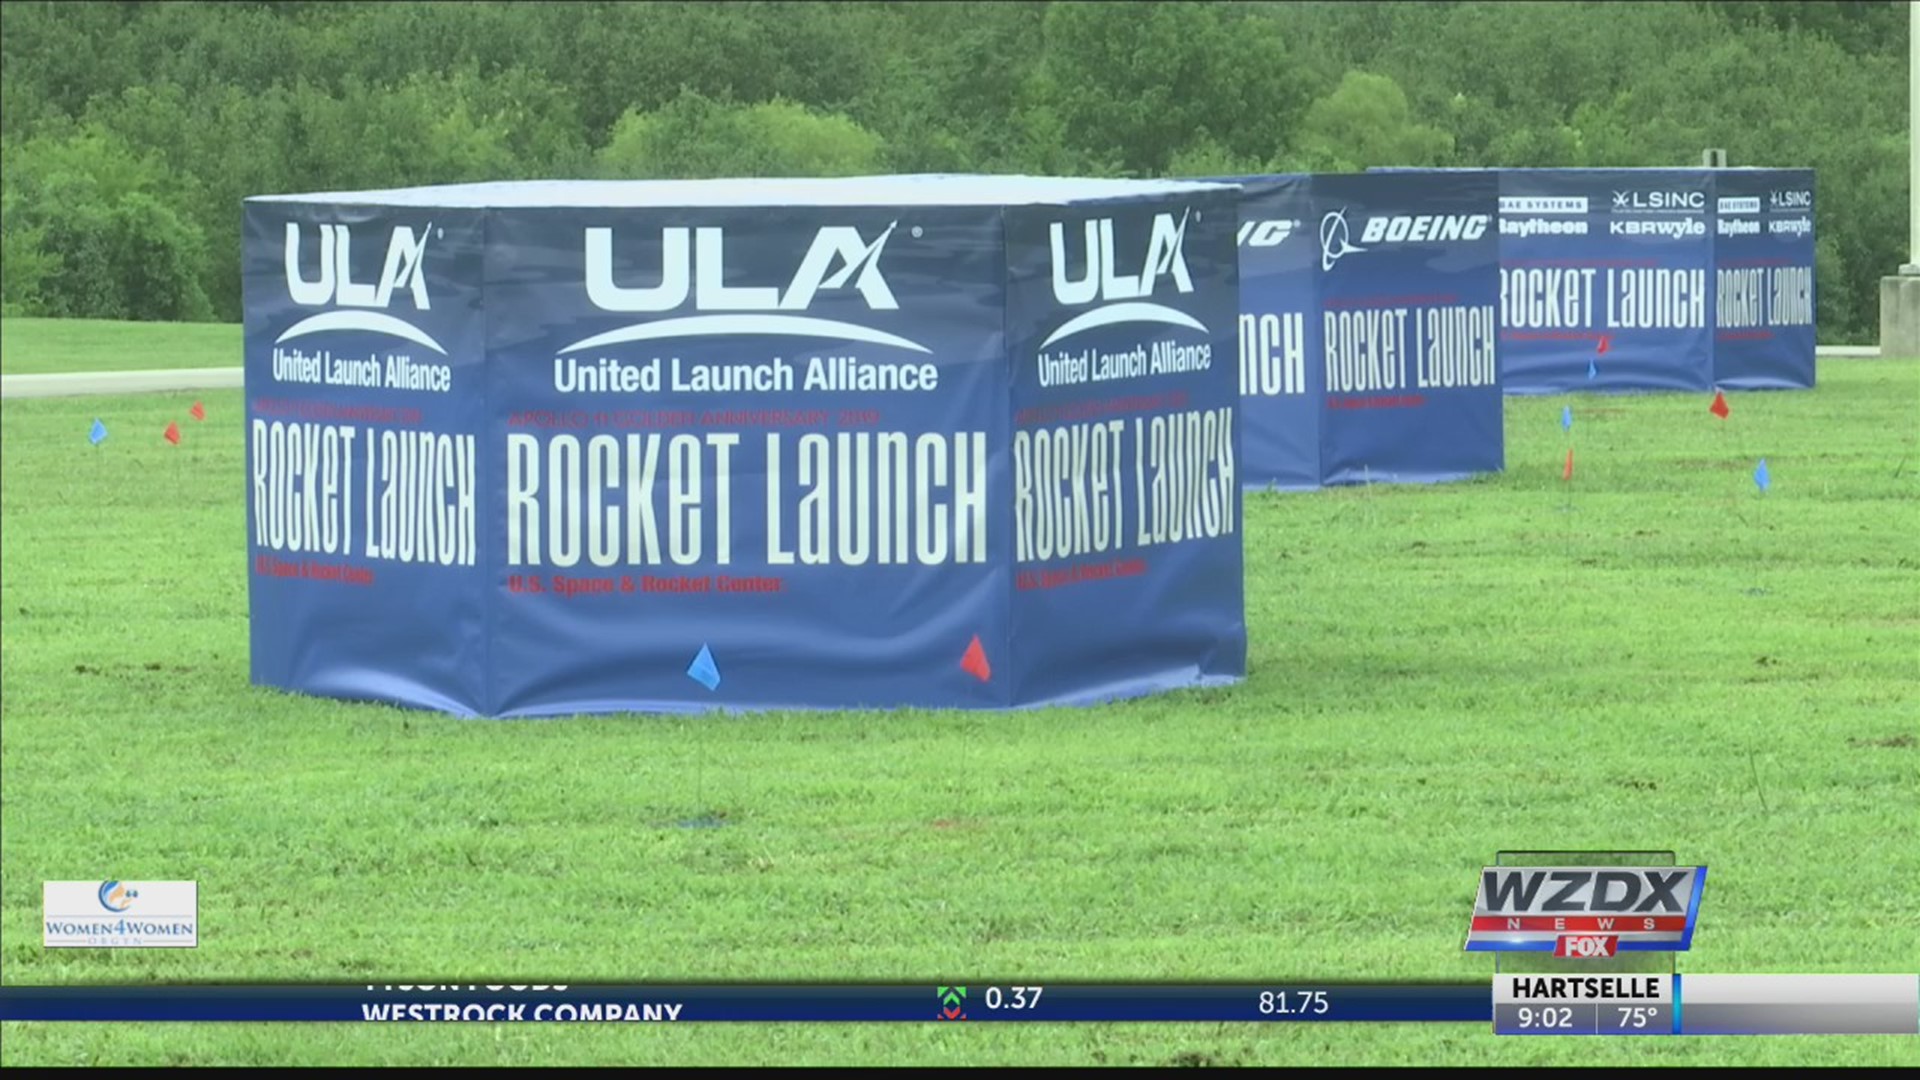 The Space & Rocket Center is inviting the public to witness a record-breaking rocket launch.